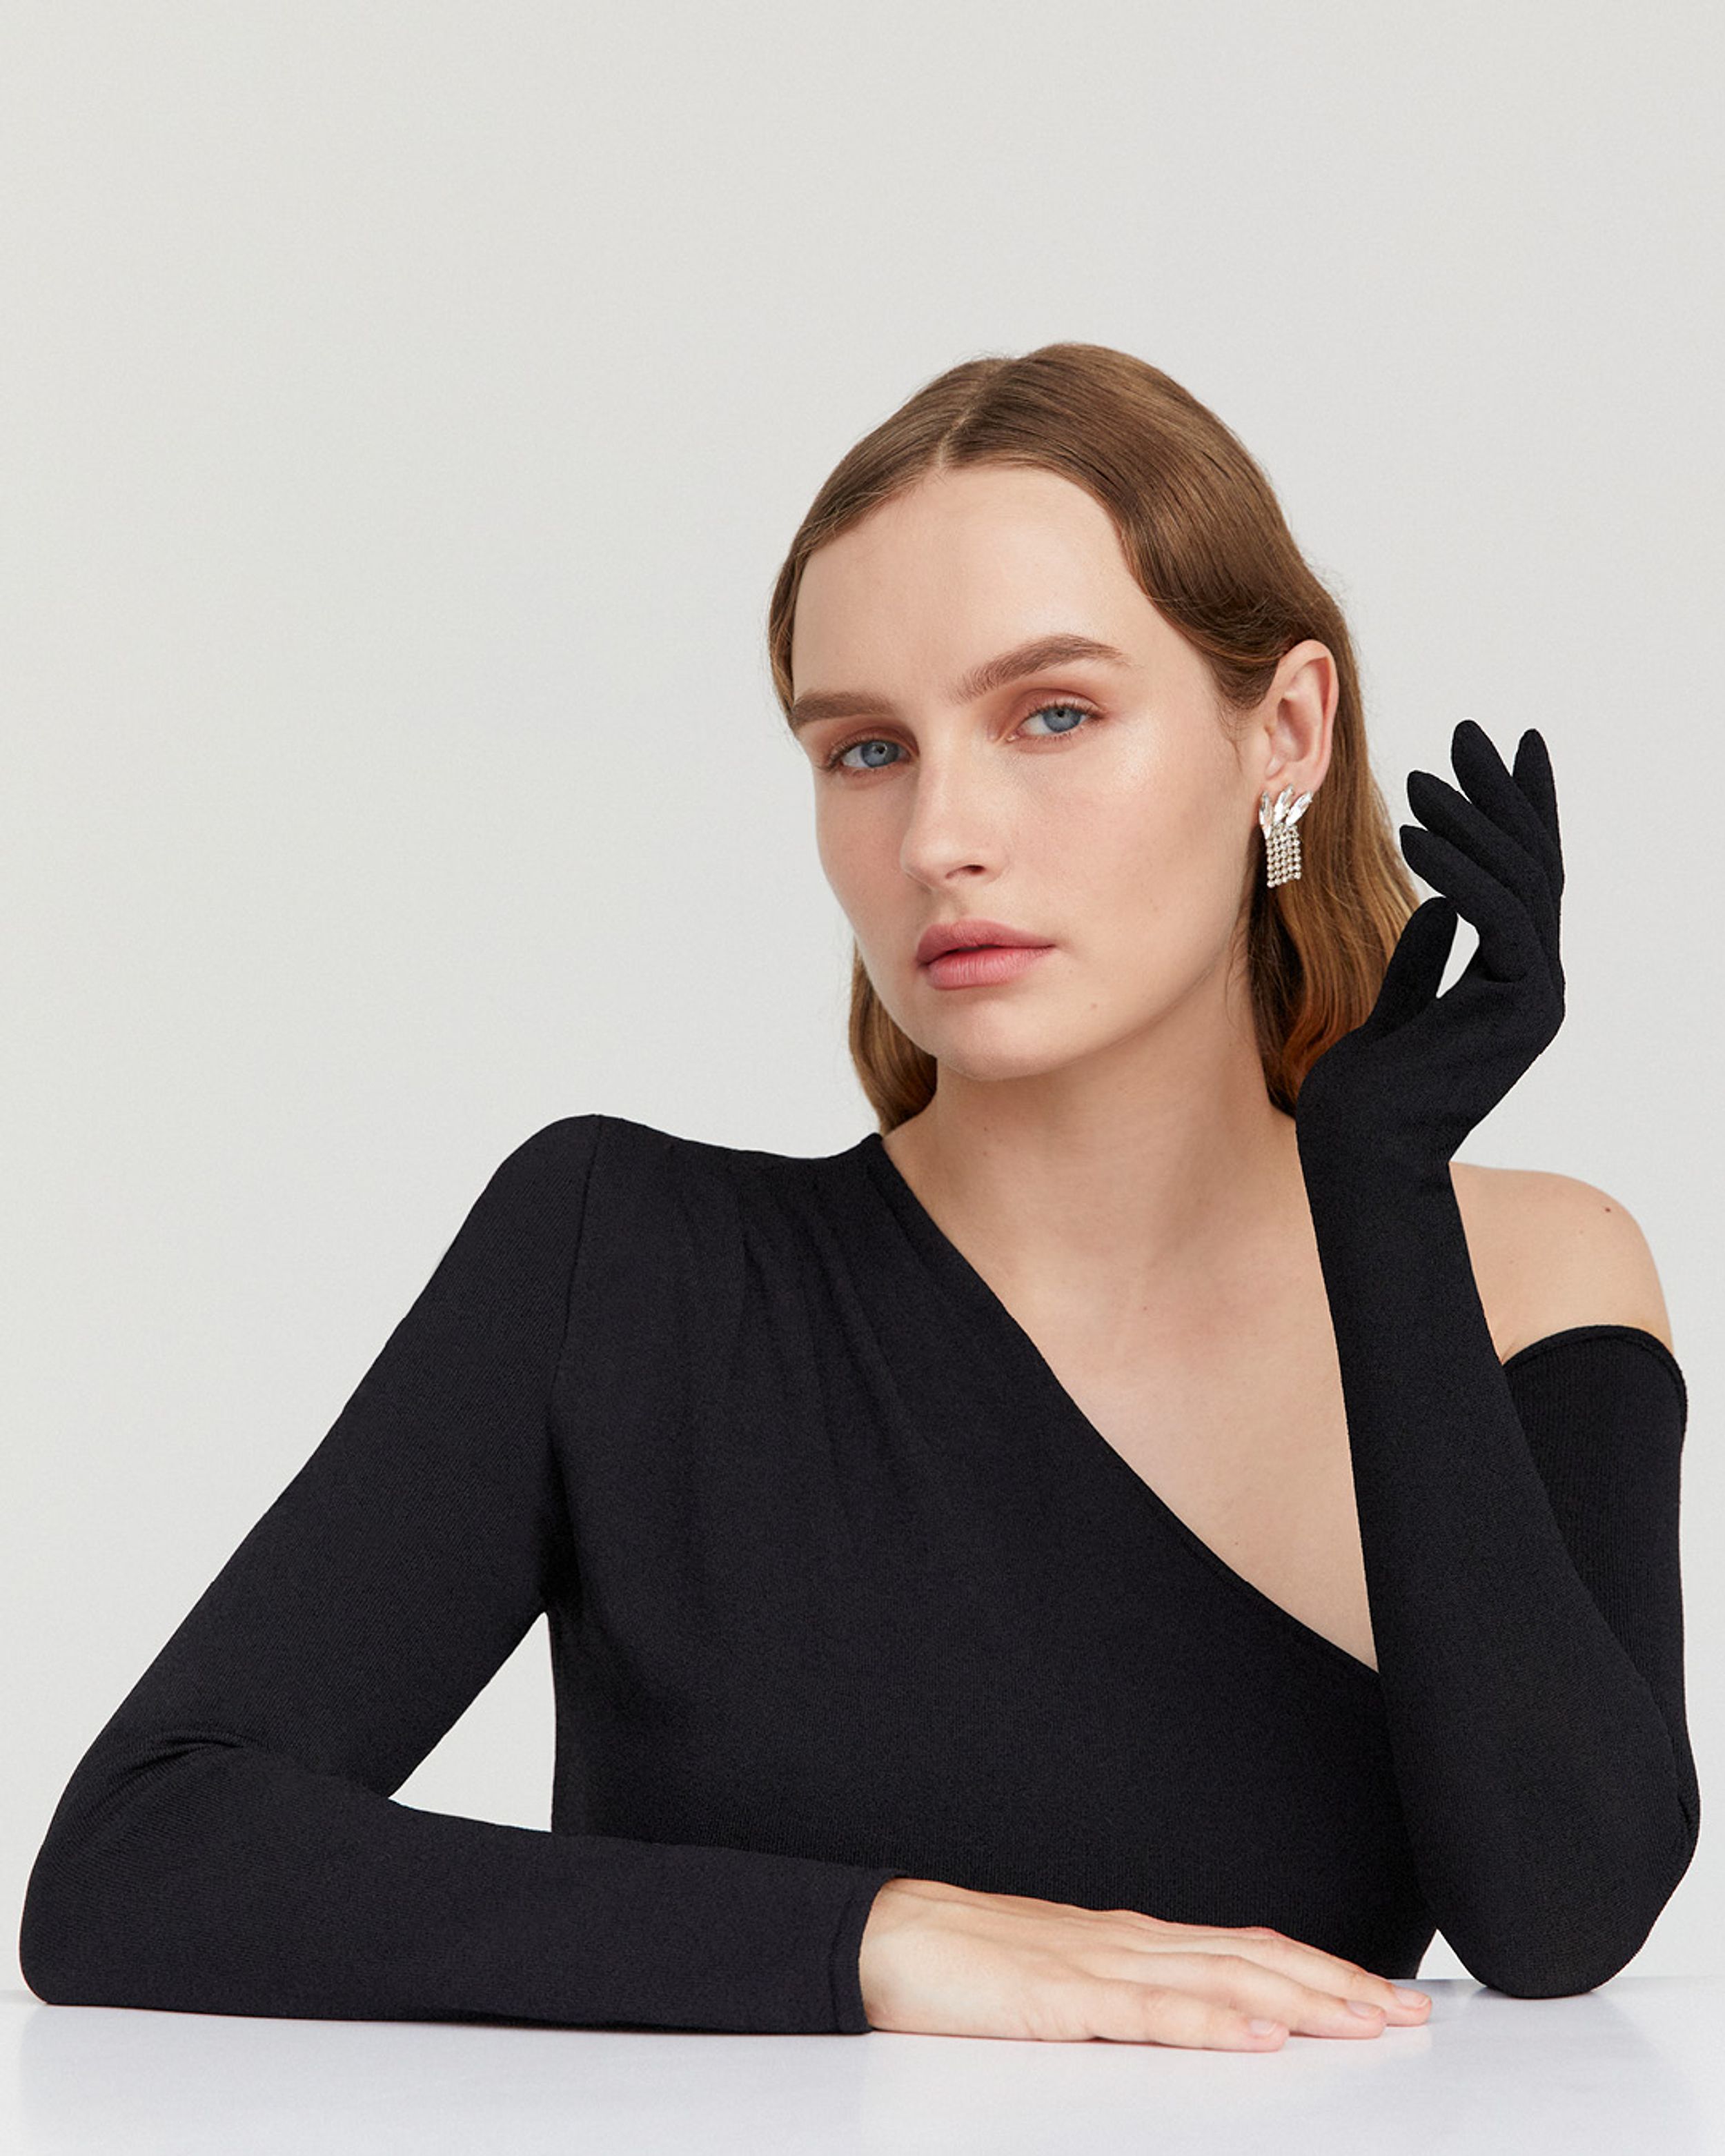 Olivia DeJonge wearing a black one-shouldered gown and black glove with hand by ear